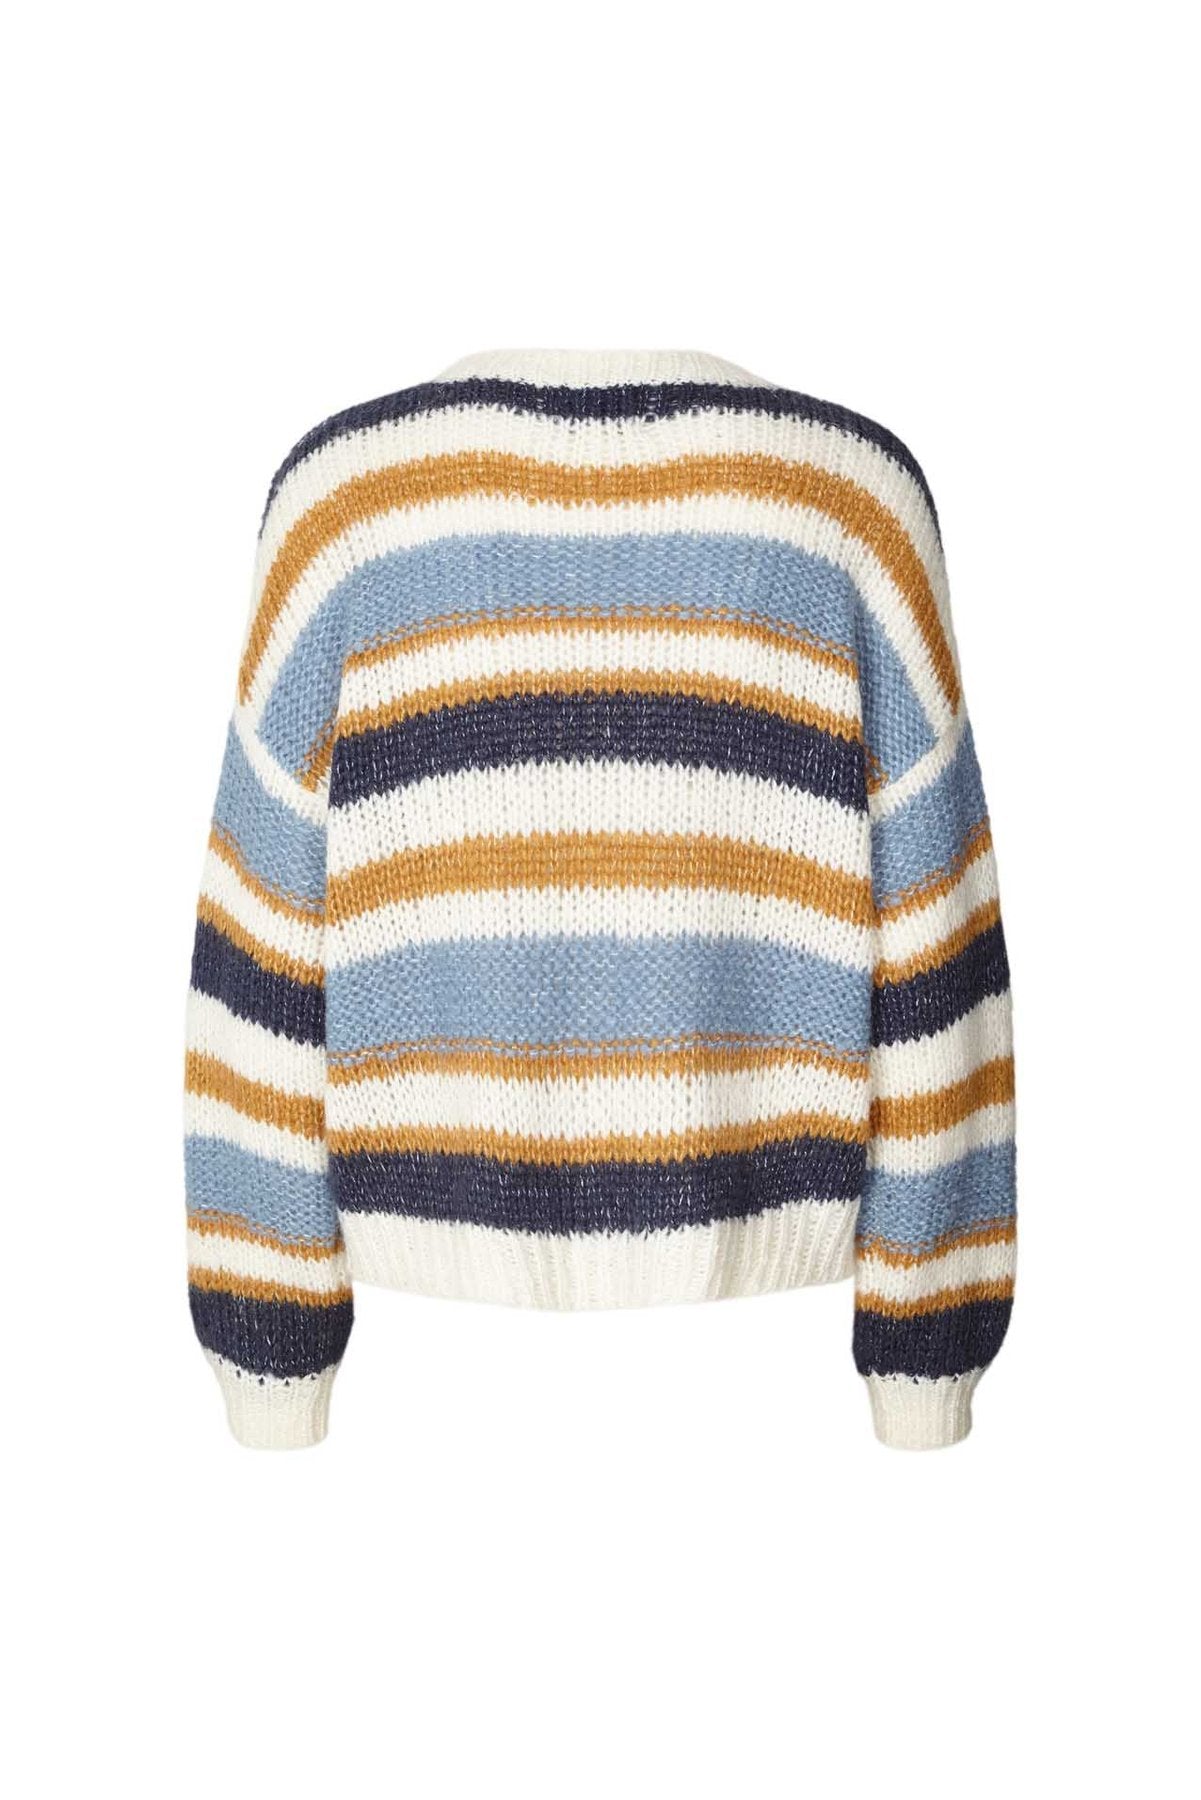 Lollys Laundry - terry striped jumper